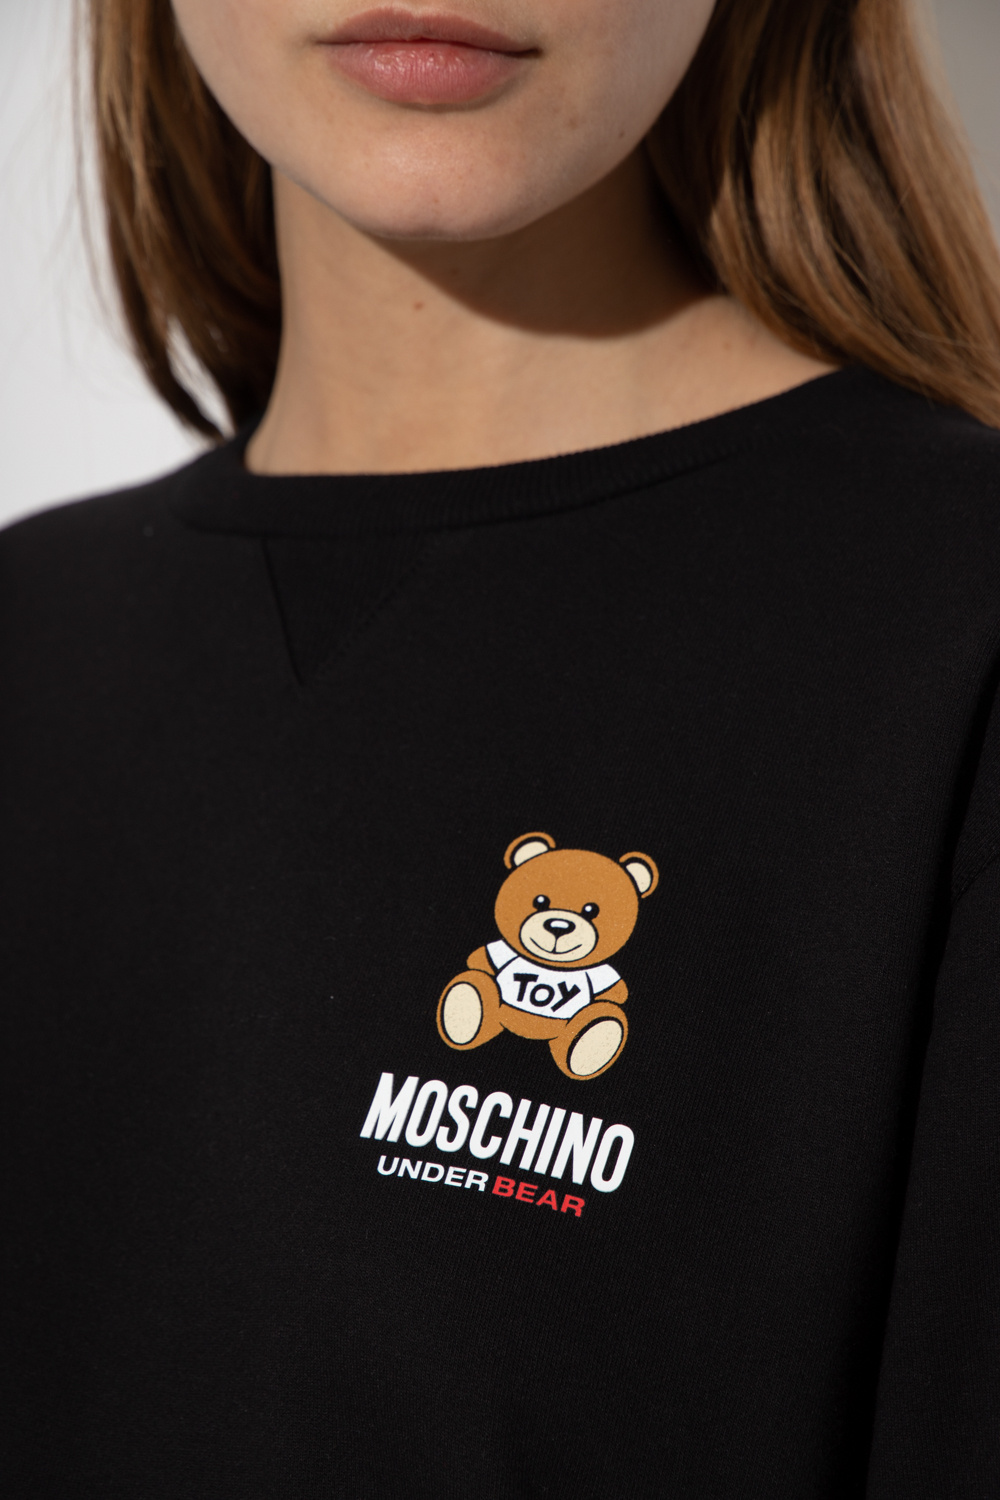 Moschino A history of the brand